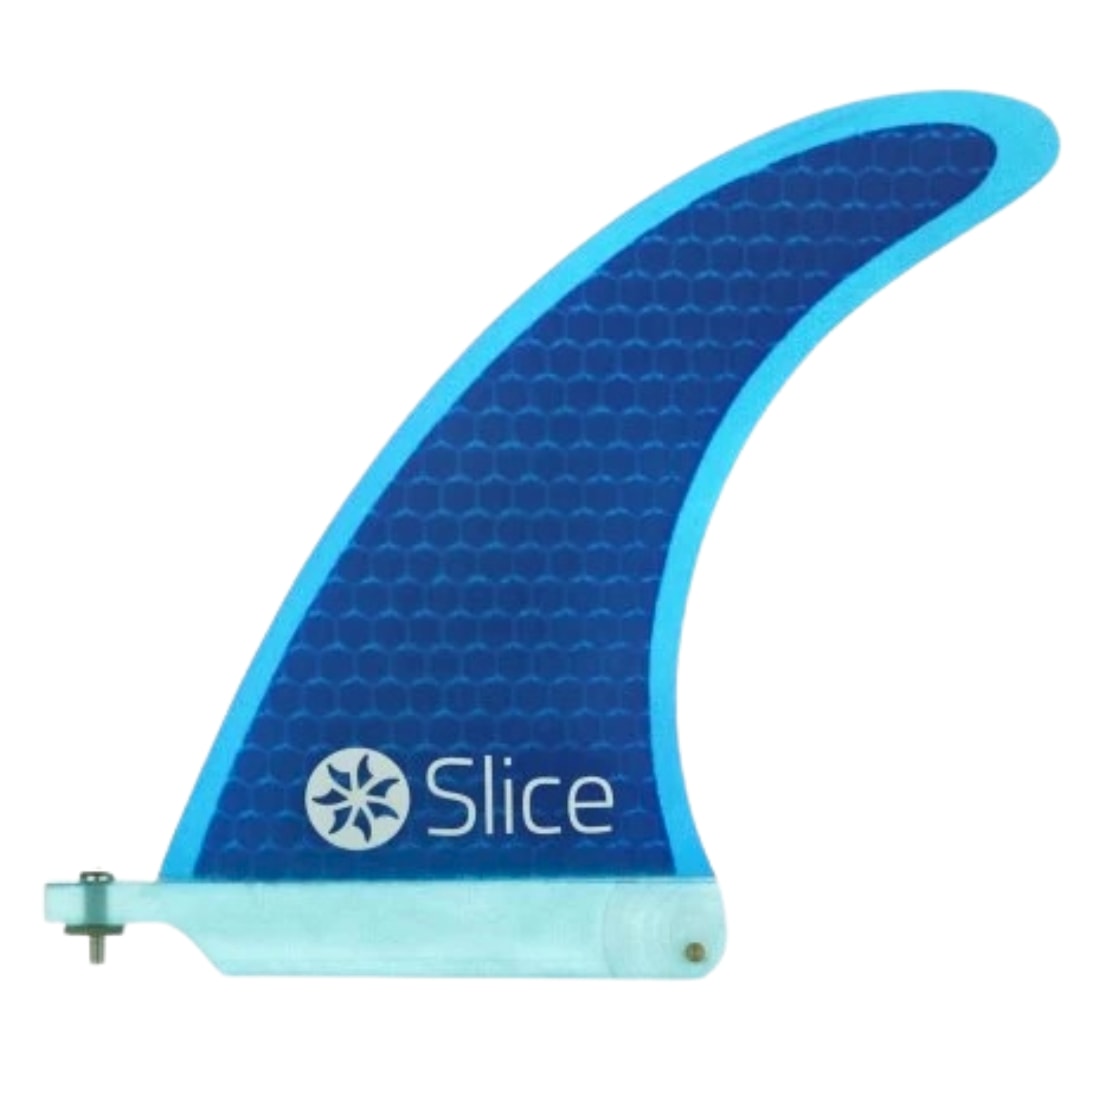 Northcore Rtm Hexcore 8&quot; Longboard Surfbord Centre Fin - Blue - Longboard/Single Fin by Northcore 8 inch